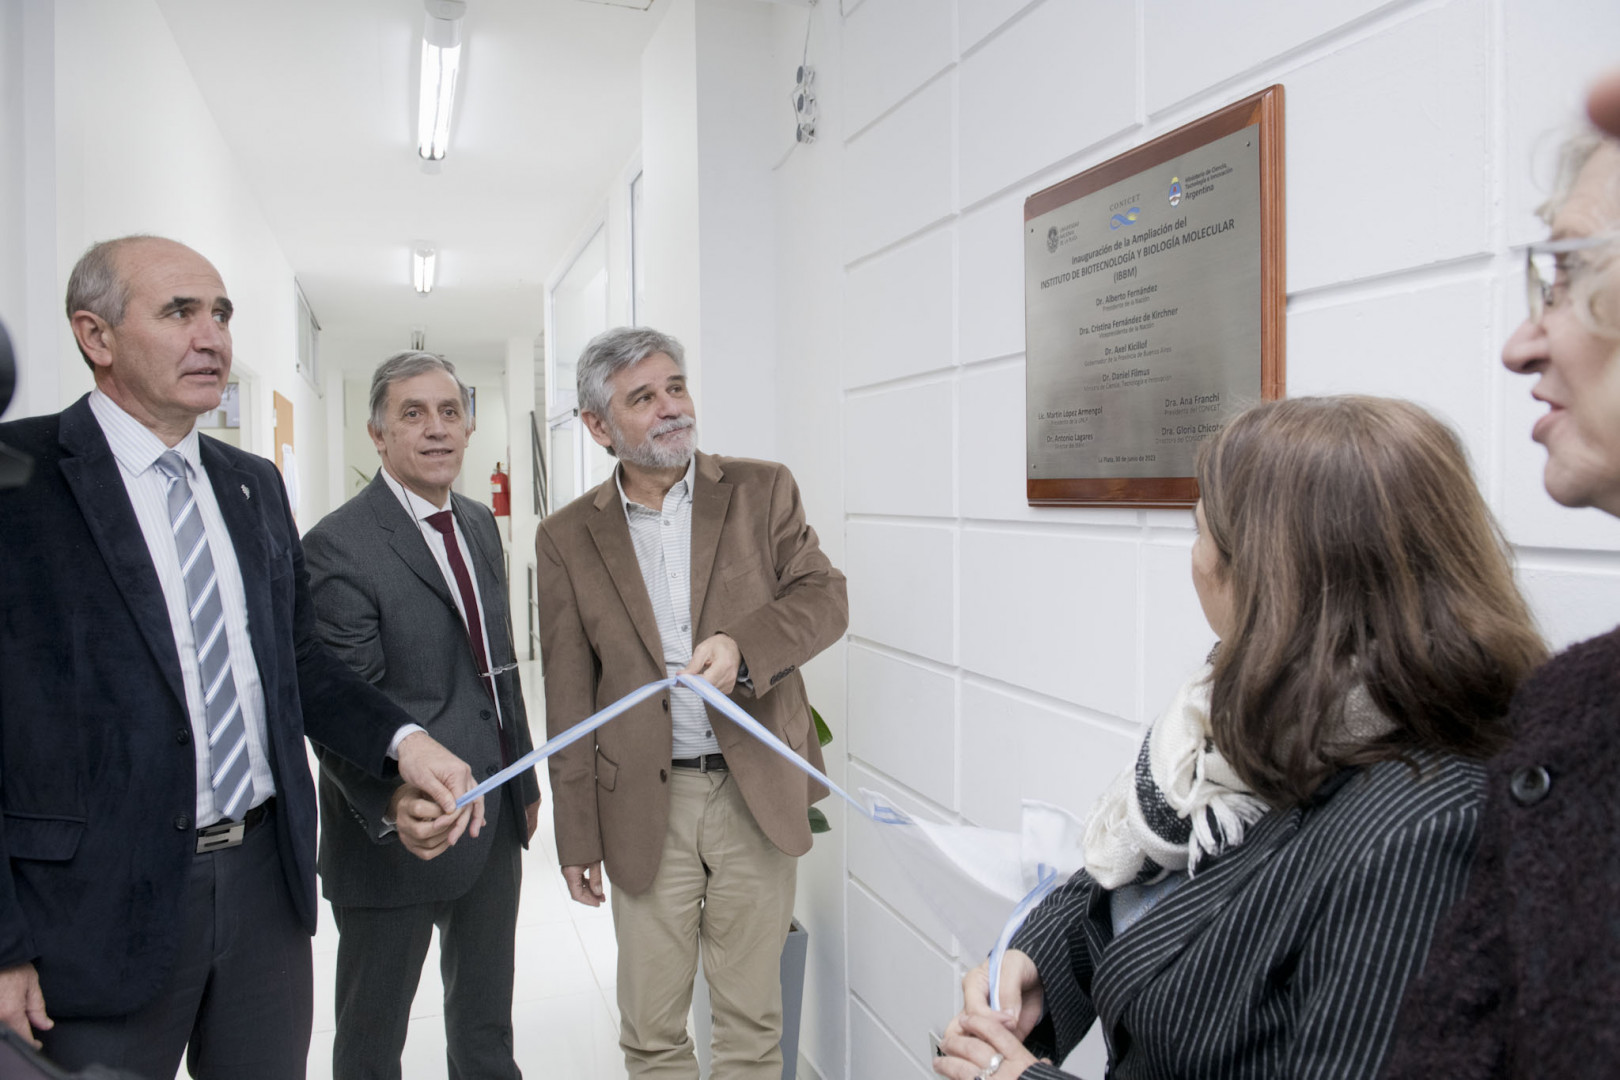 The new facilities of the Institute of Biotechnology and Molecular Biology are inaugurated in La Plata